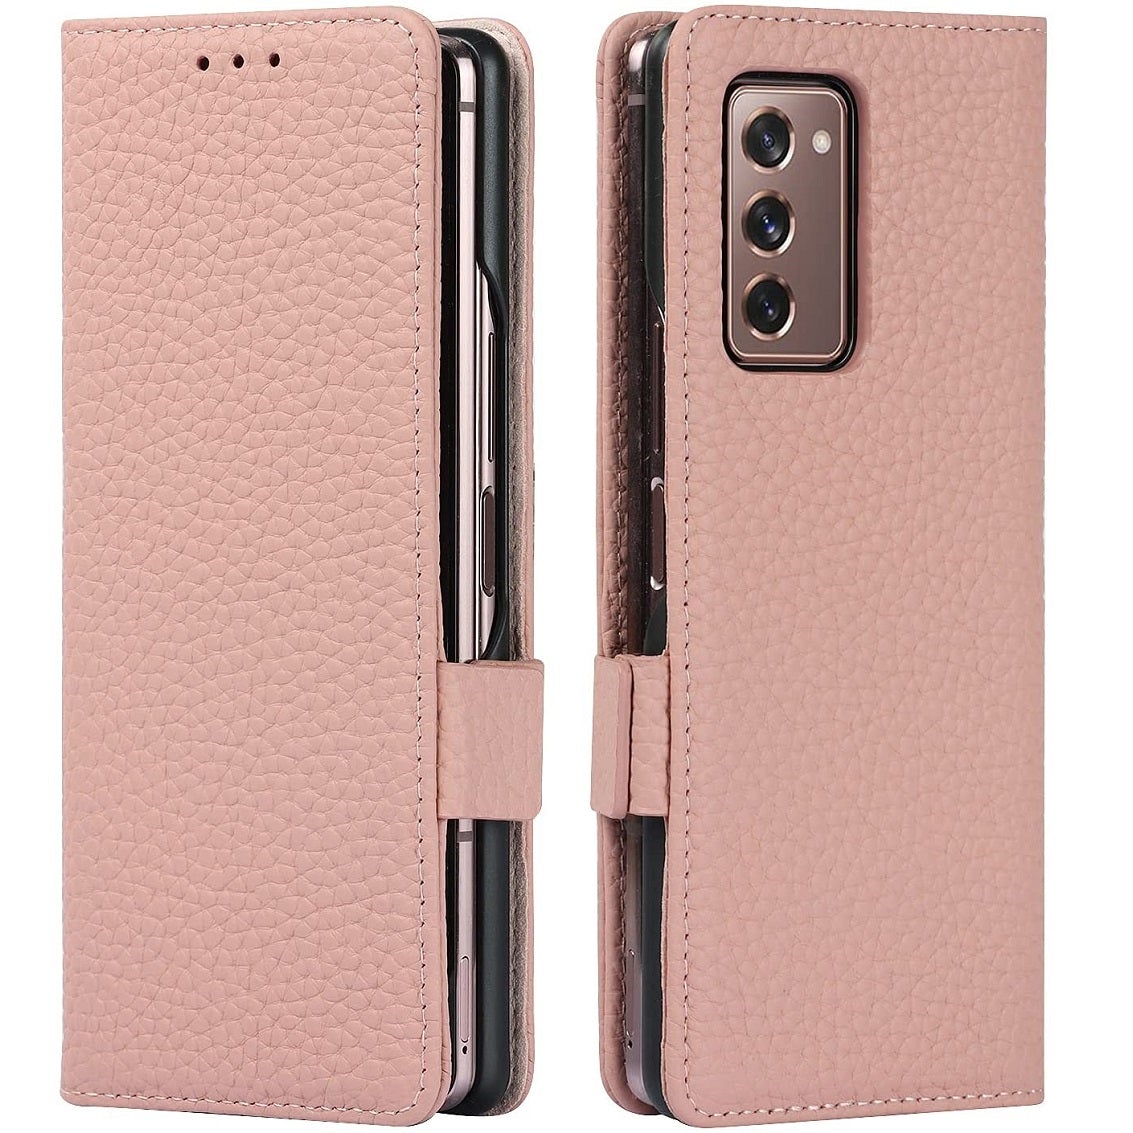 Samsung Galaxy Z Fold 2 Genuine Leather Phone Wallet Case with Card Holder